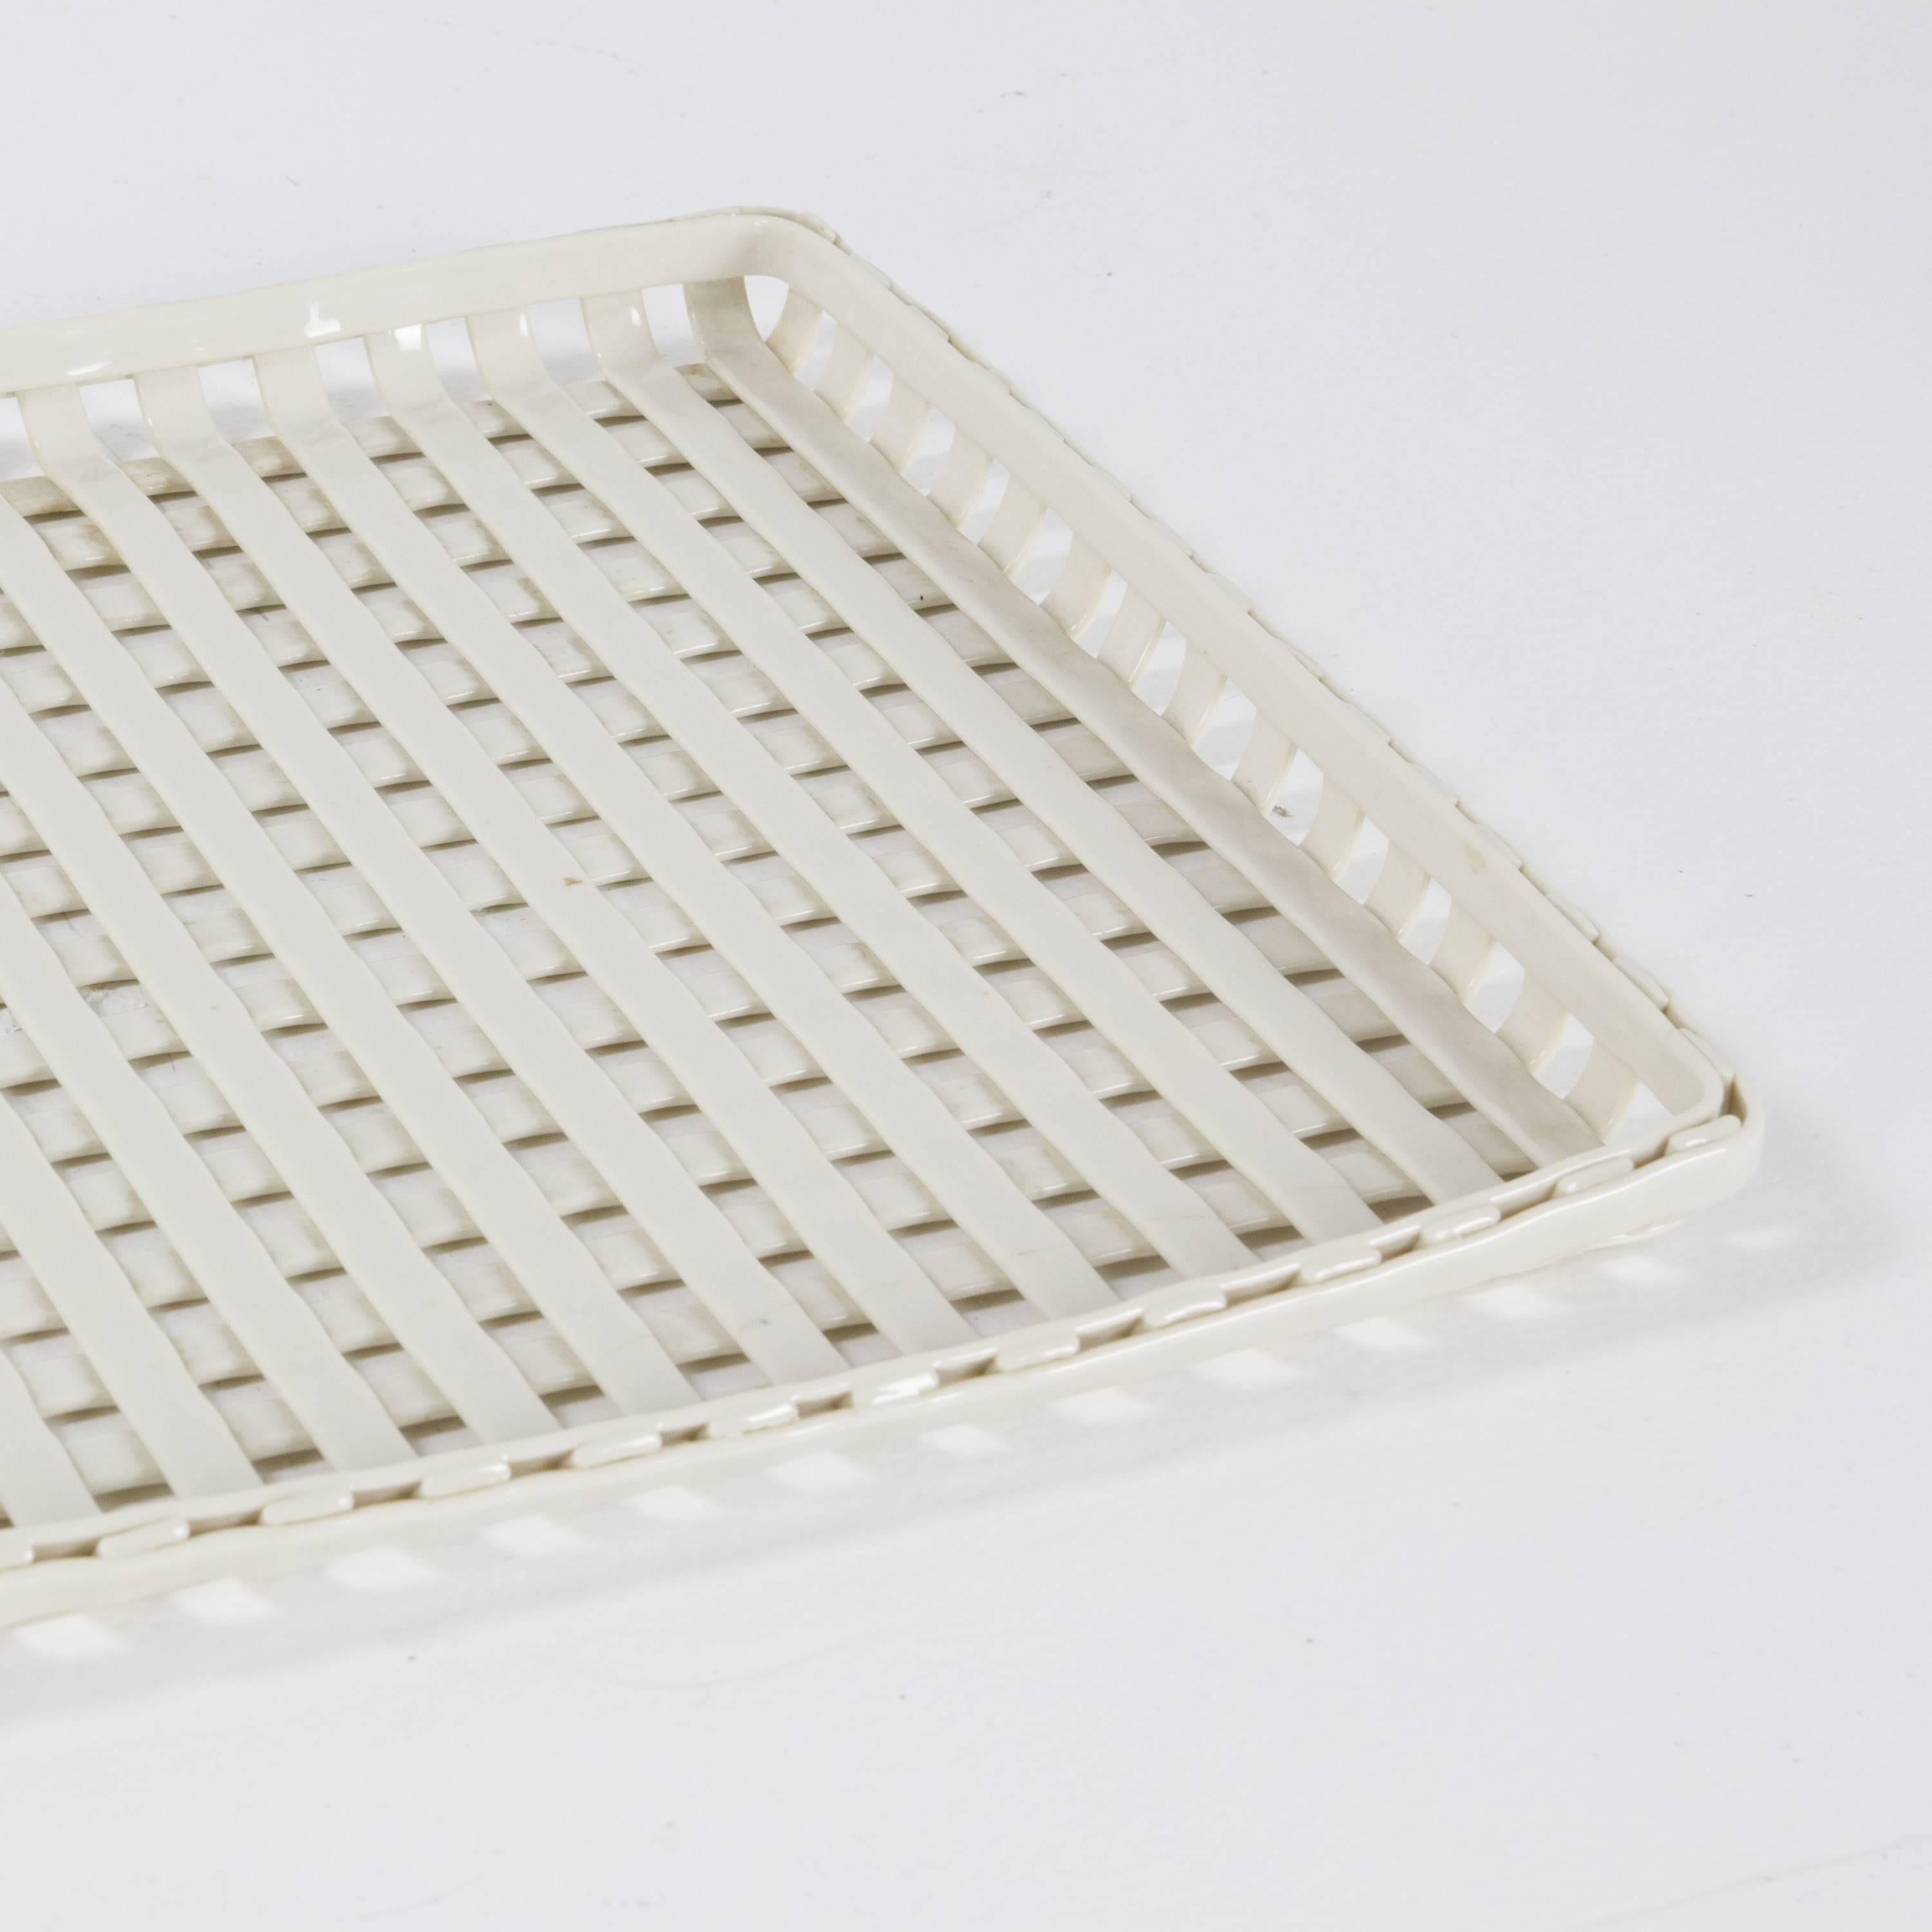 Rare hand built woven porcelain slab tray by Enzo Mari for Danese. Signed and dated on underside.